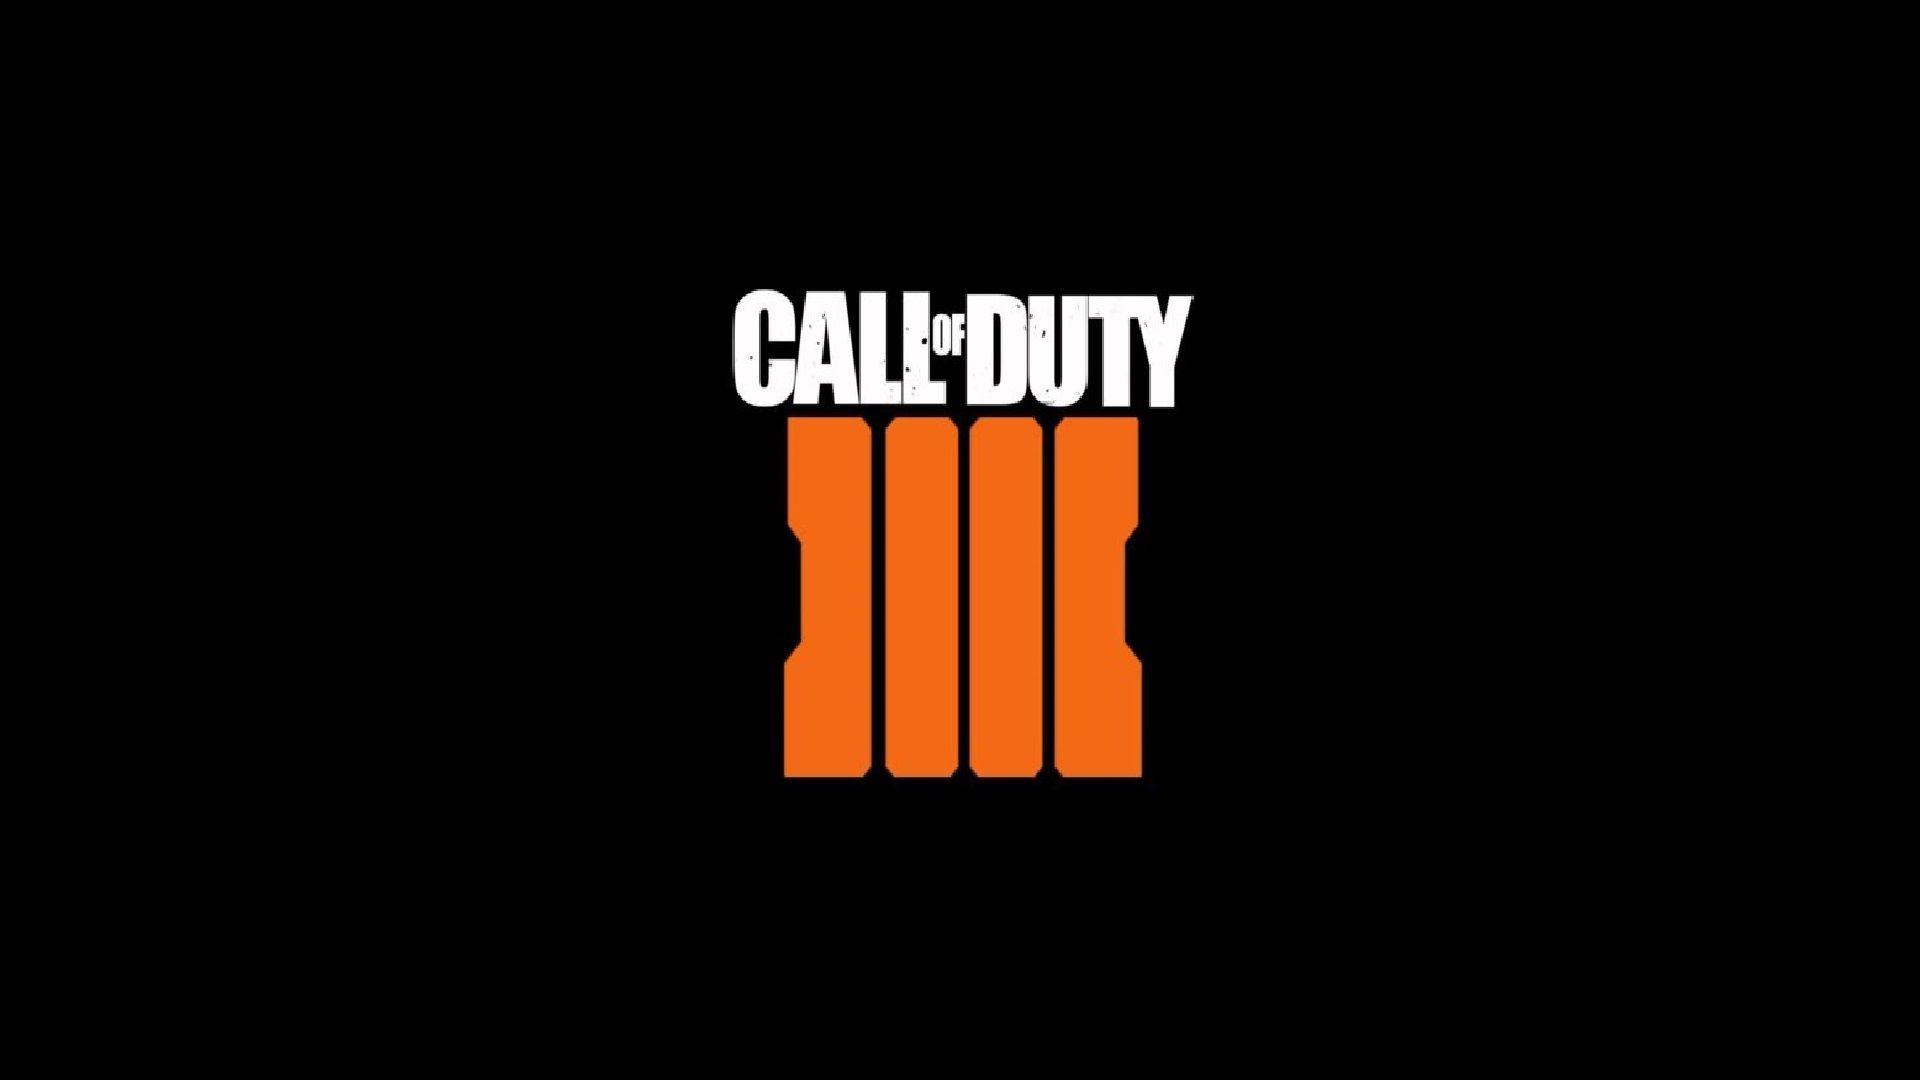 Black Ops 4 Wallpapers Top Free Black Ops 4 Backgrounds Wallpaperaccess